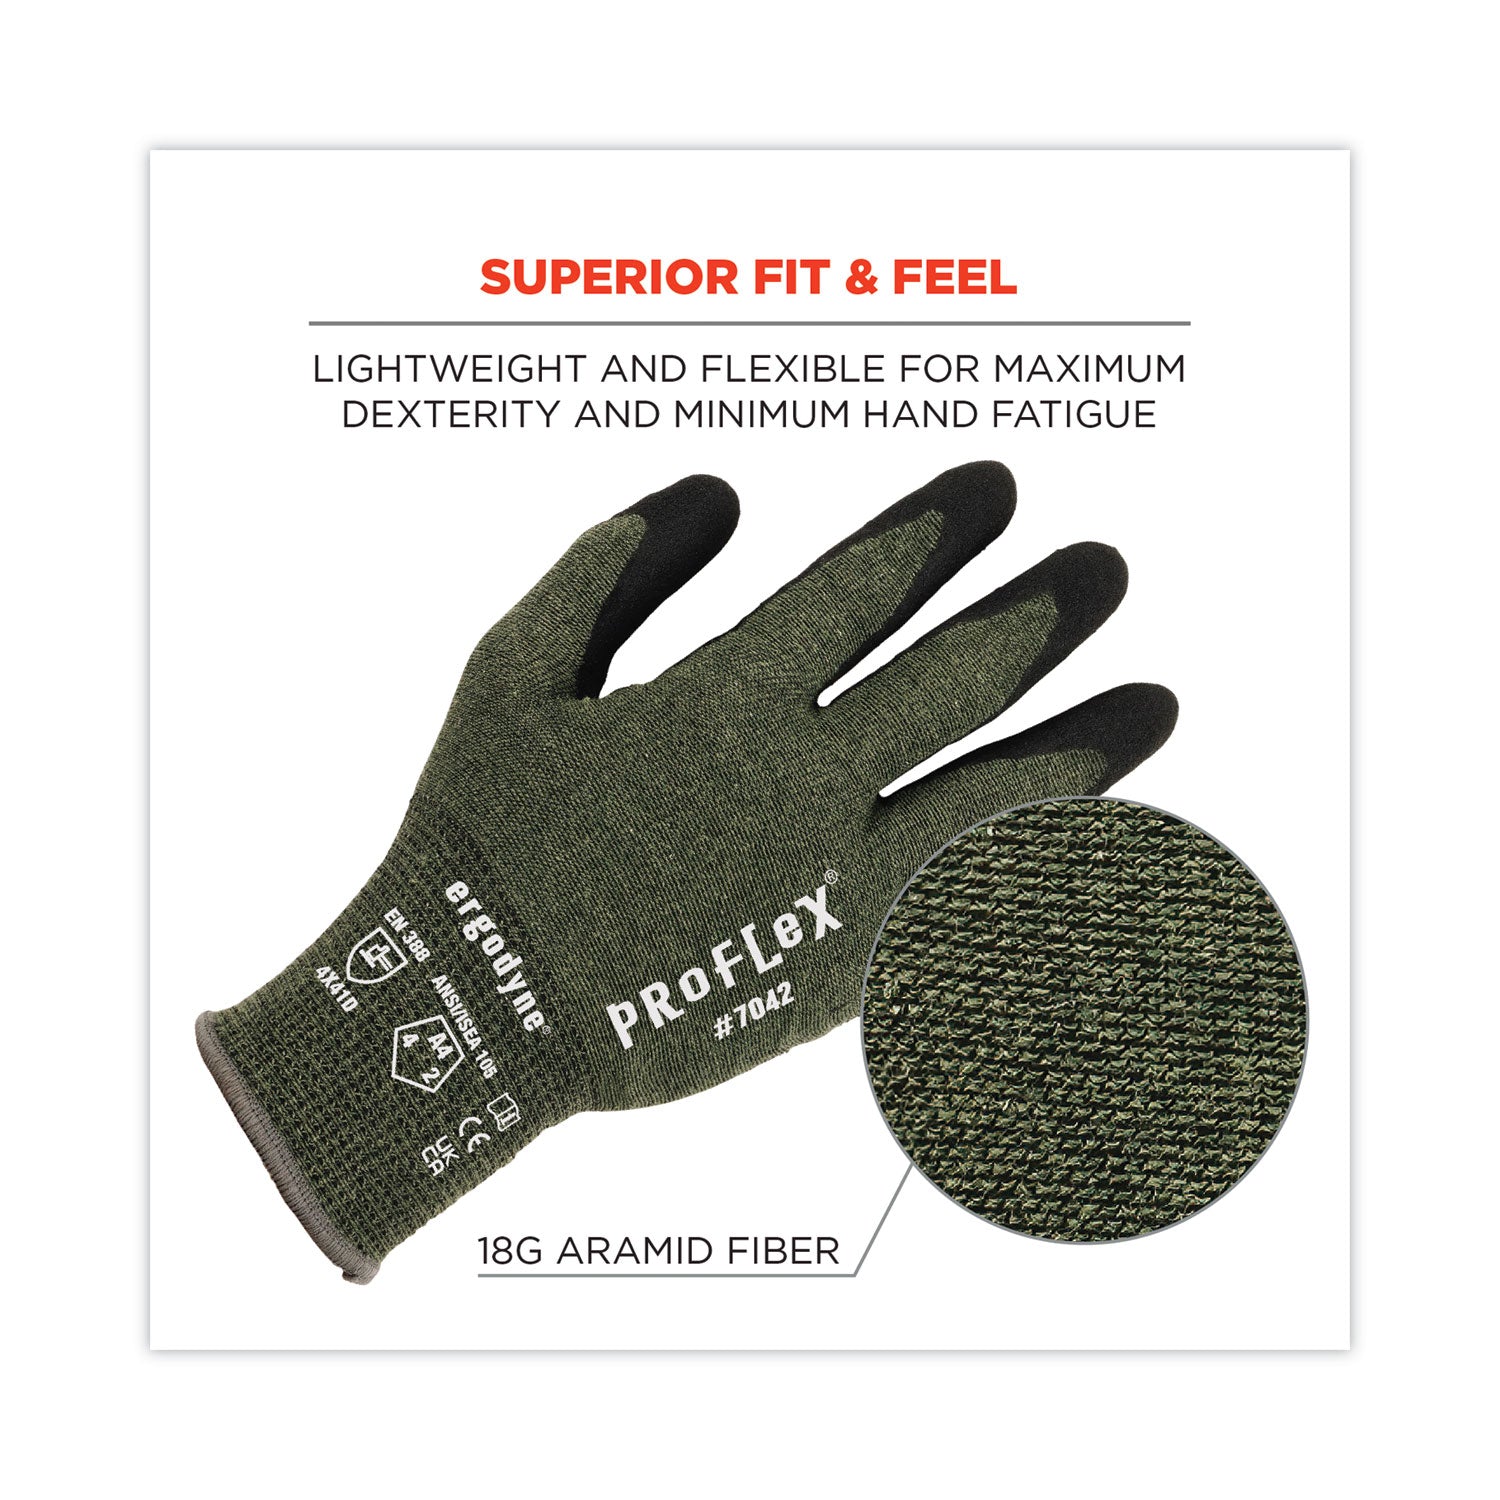 proflex-7042-ansi-a4-nitrile-coated-cr-gloves-green-small-pair-ships-in-1-3-business-days_ego10342 - 5